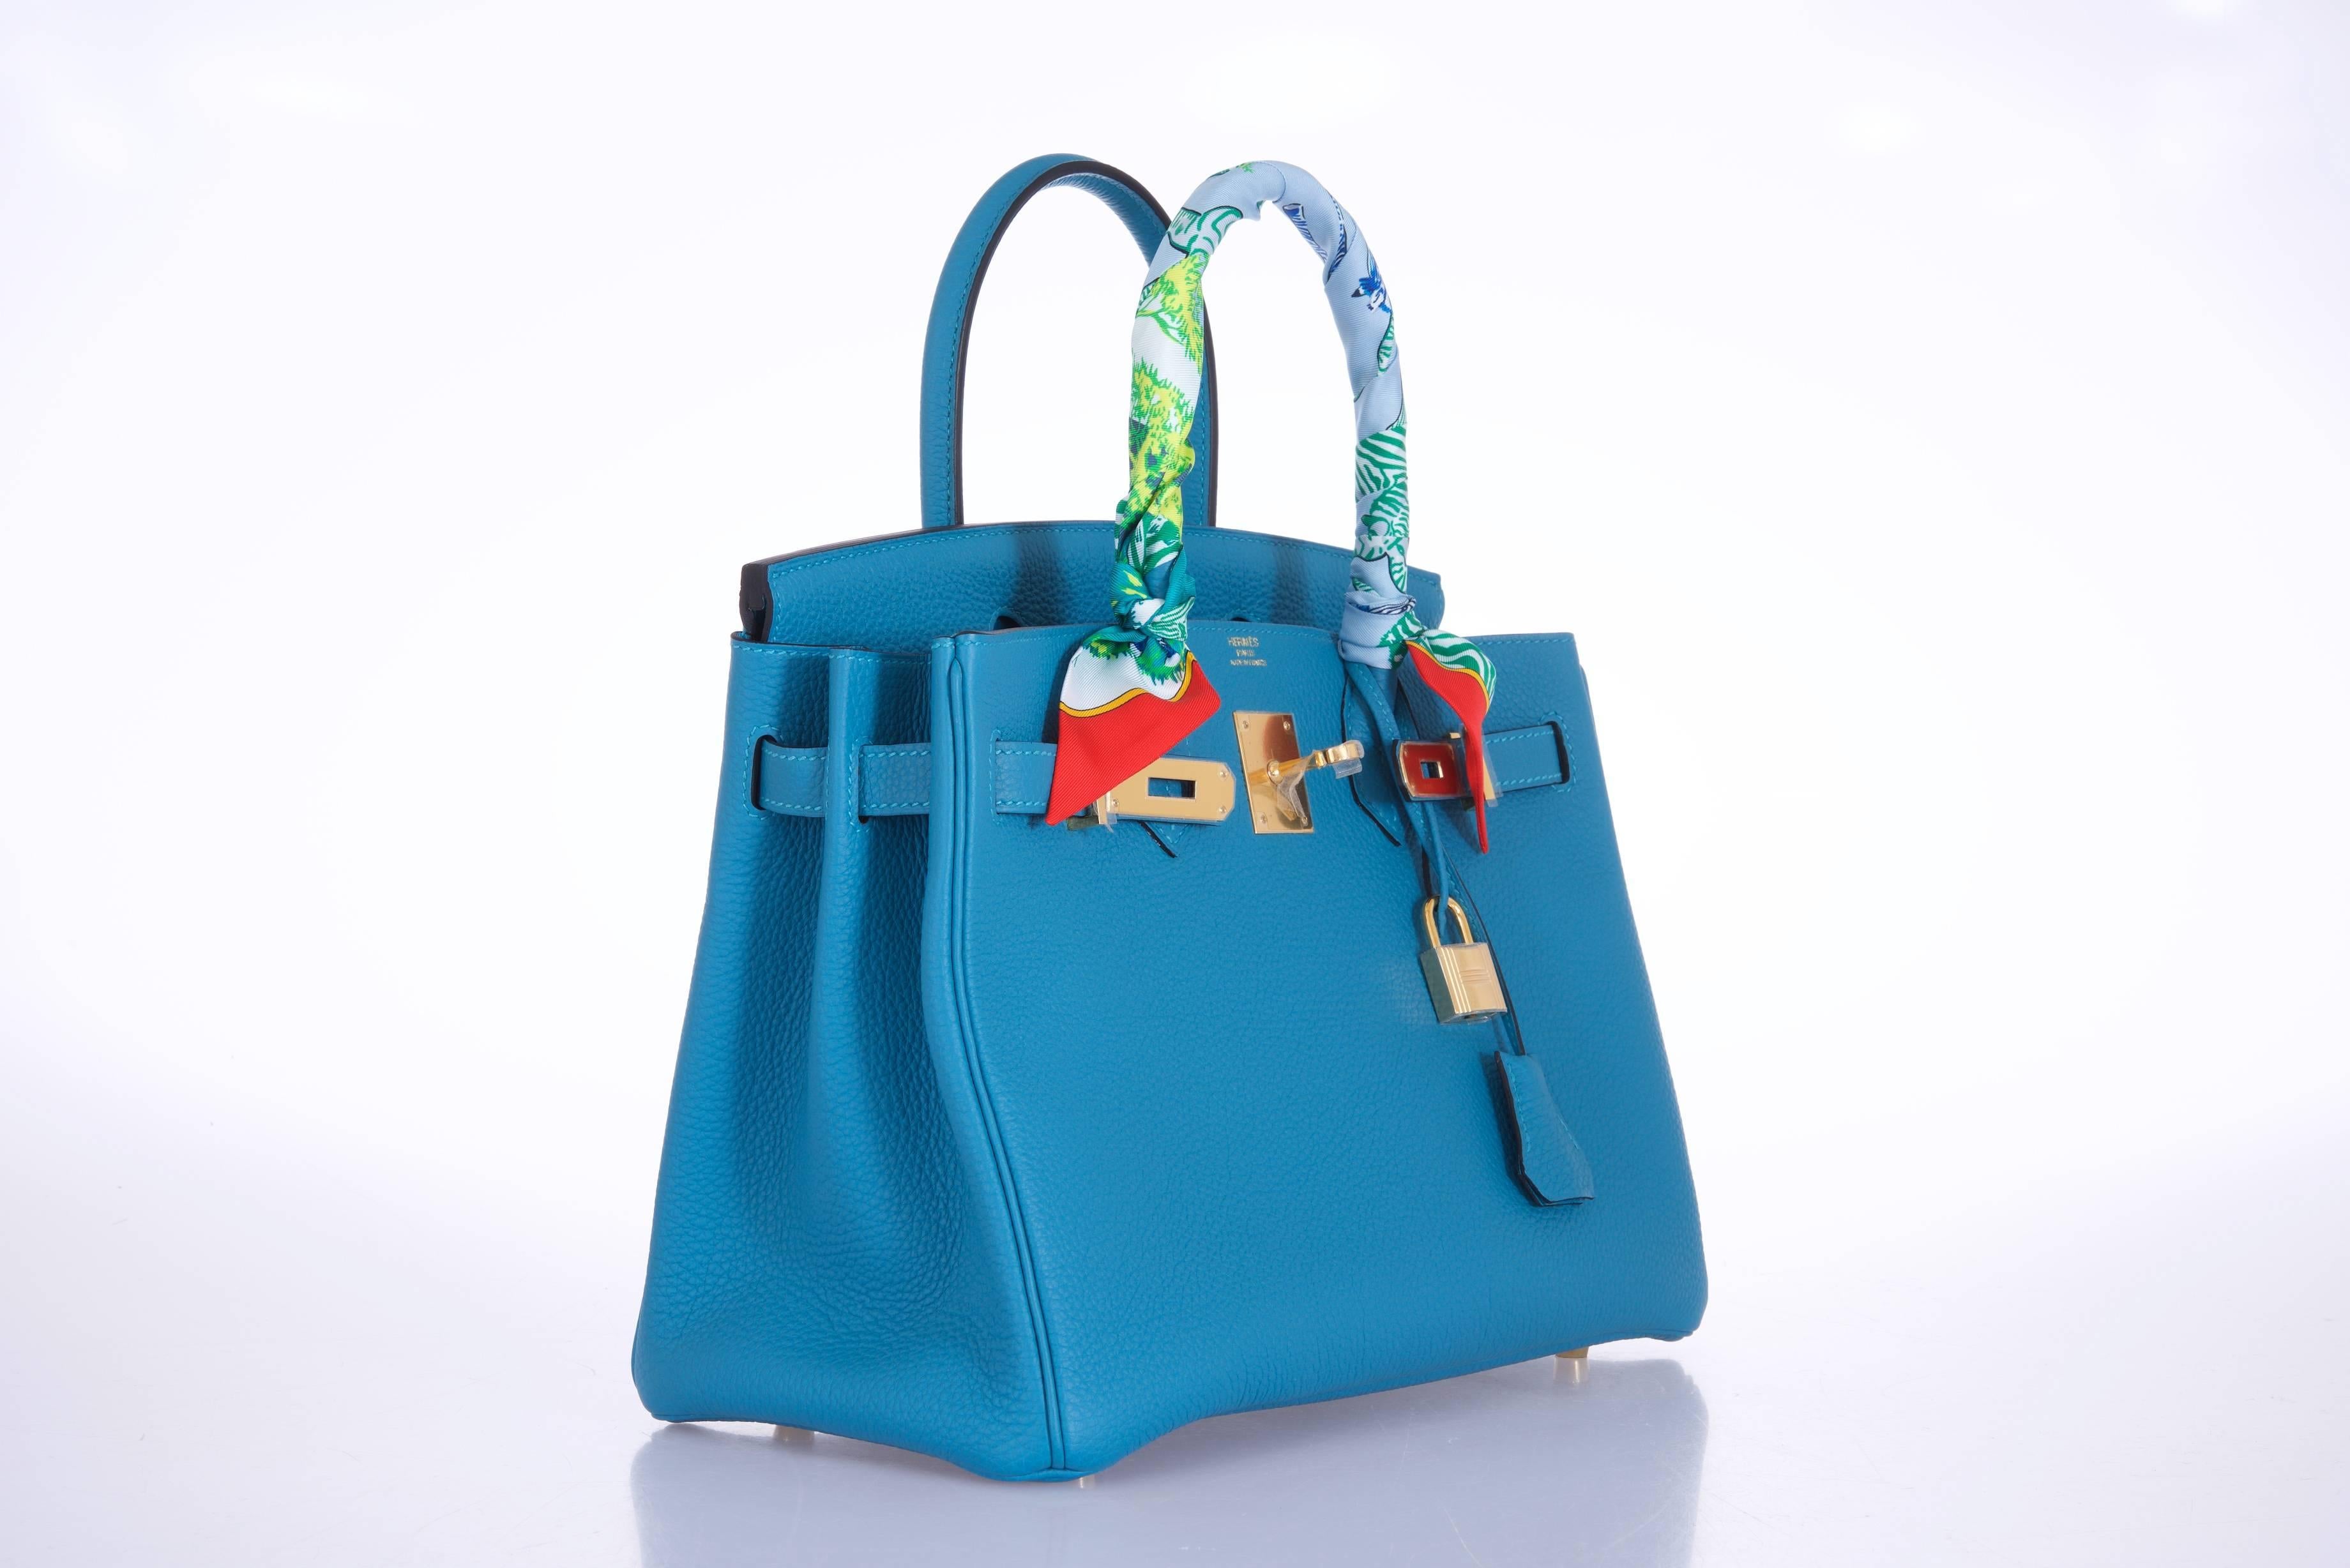 Hermes 30cm Turquoise with Gold hardware 
New 
Hardware: Gold
Country of Origin: France
Color: Turquoise
Closure: Toggle
Handle Drop (in inches): 4.25
Authenticity Details: Hermes markings
Primary Material: Leather
Height (in inches):